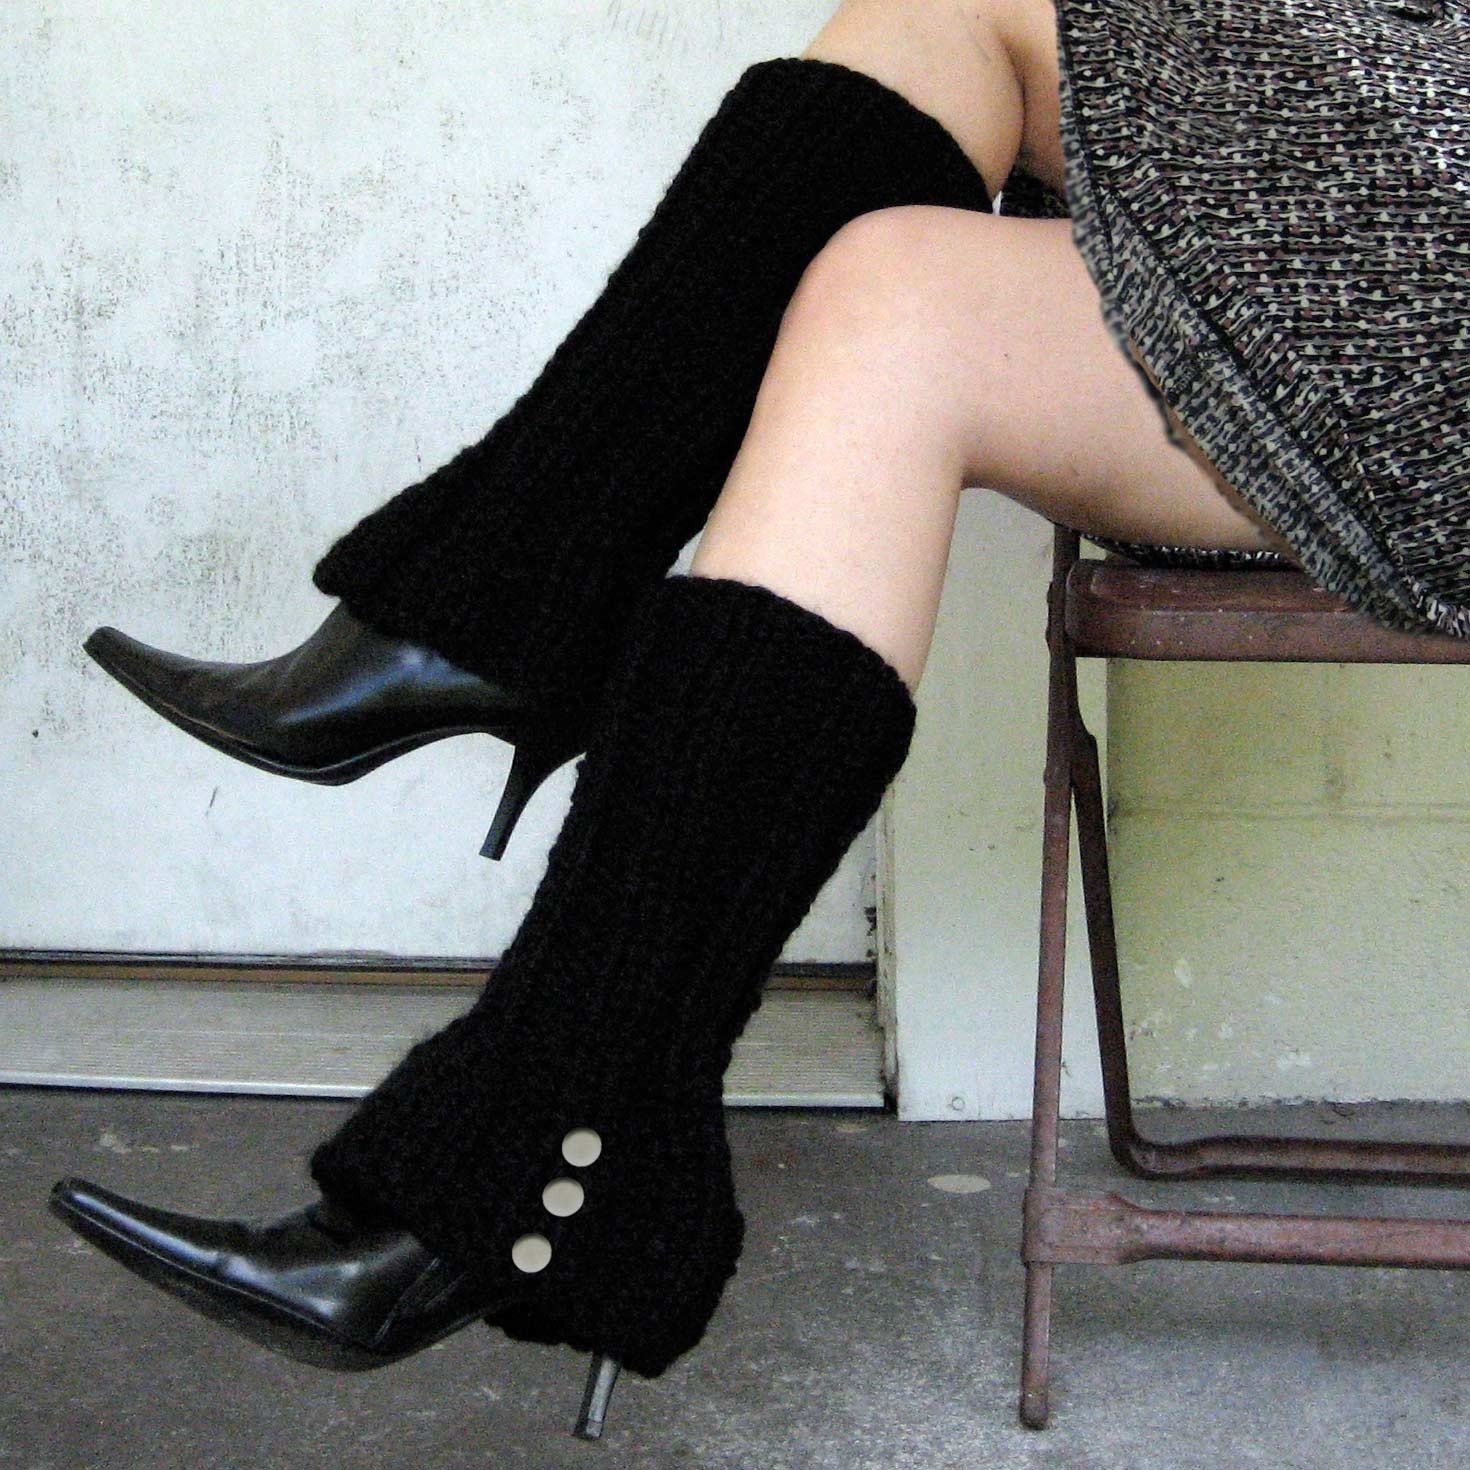 Faux Boot Legwarmers in BLACK with Spat Style Buttons - FREE SHIPPING WORLDWIDE